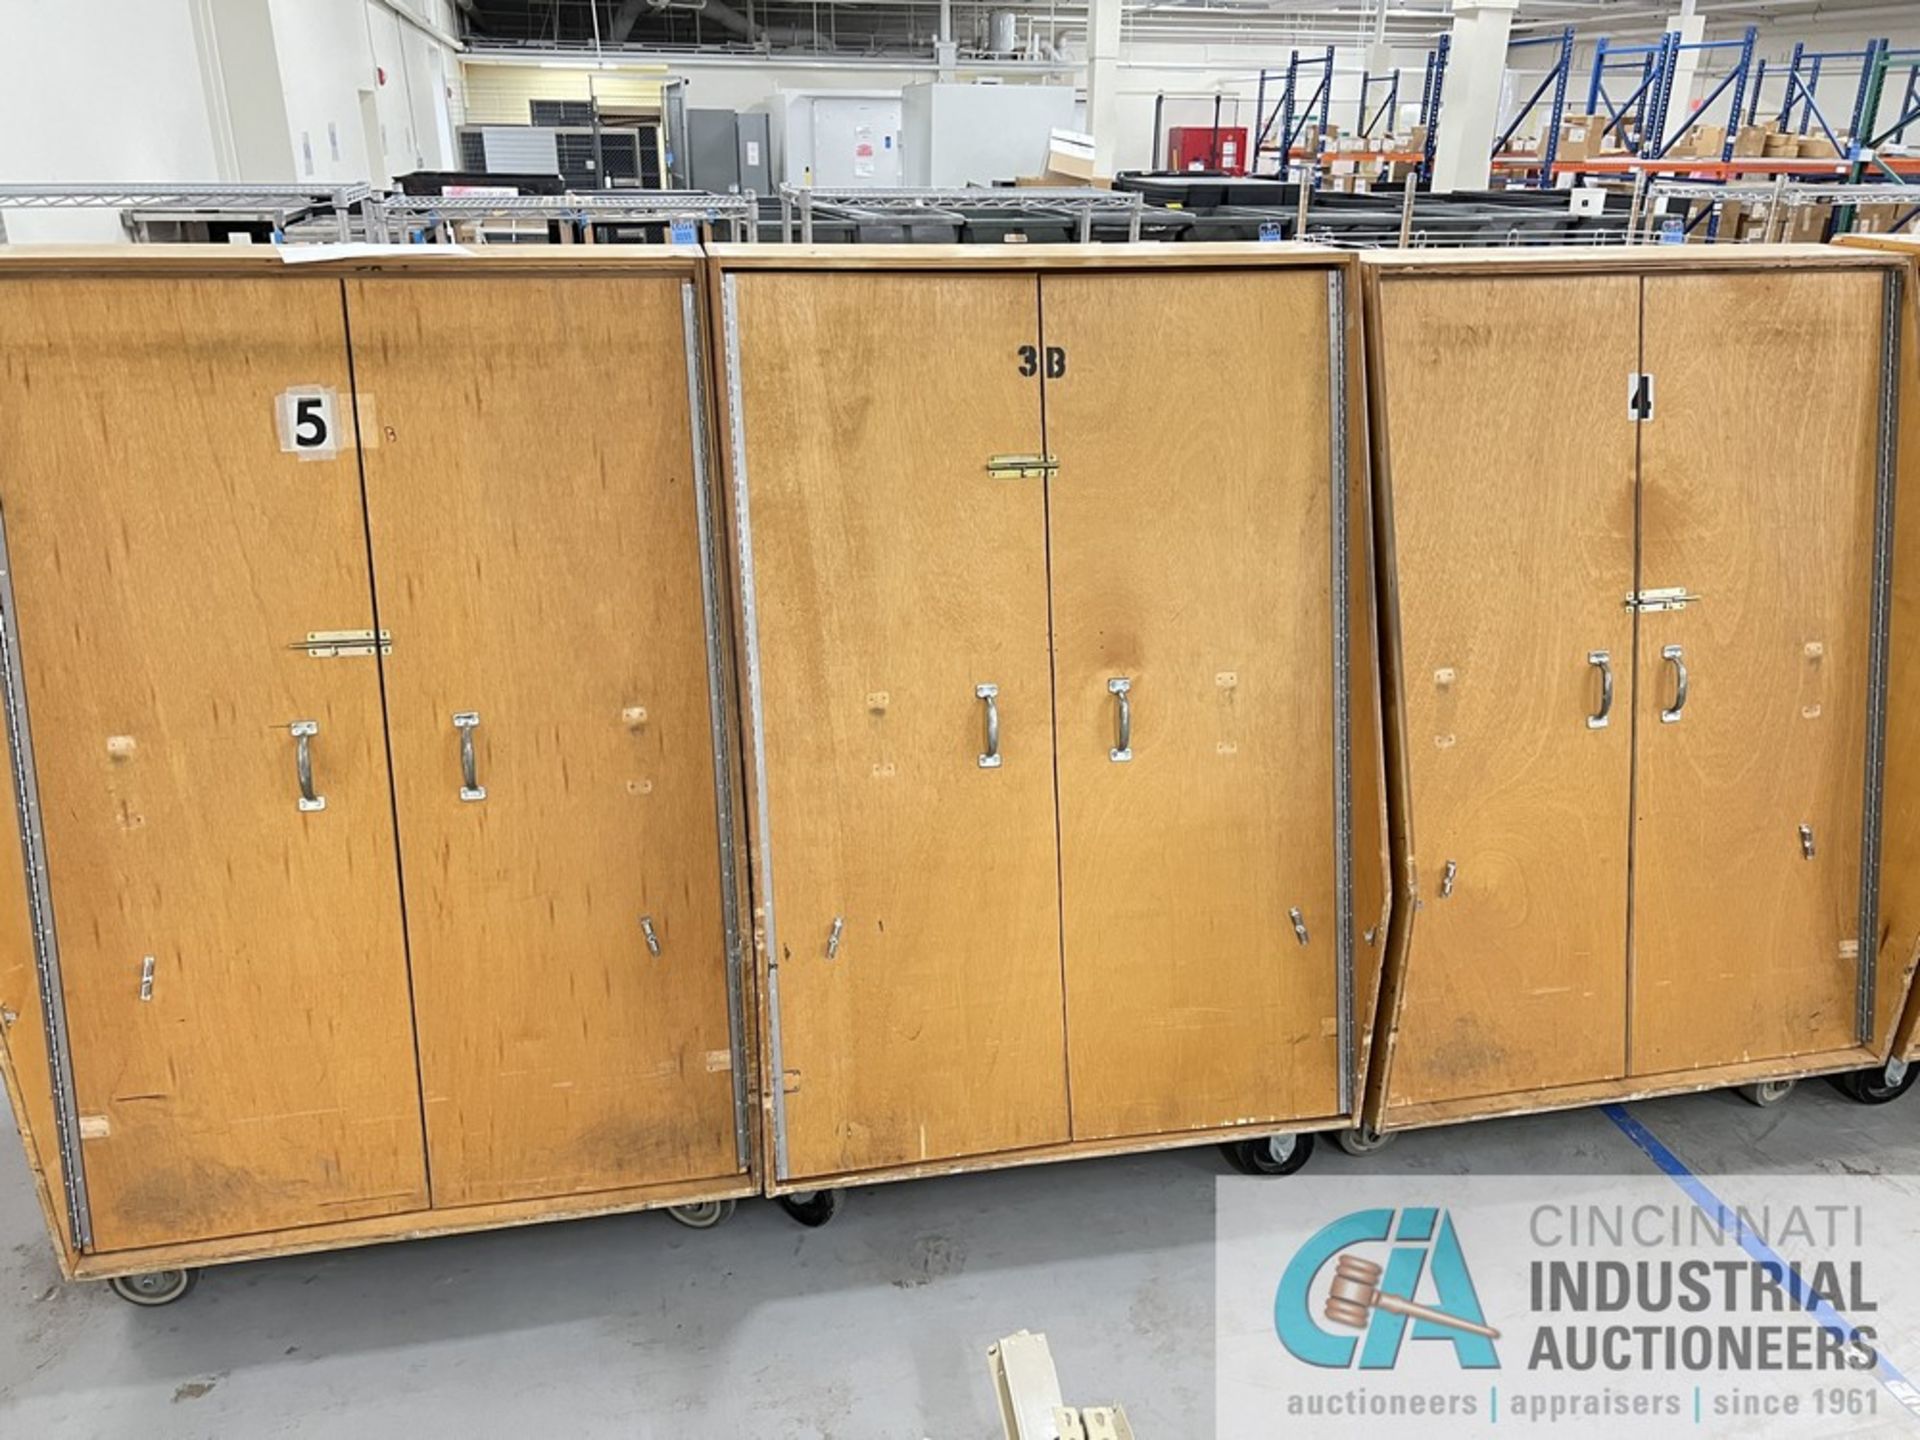 44" X 44" X 68" WOOD ENCLOSED A-FRAME CABINETS (WAREHOUSE) - Image 3 of 3